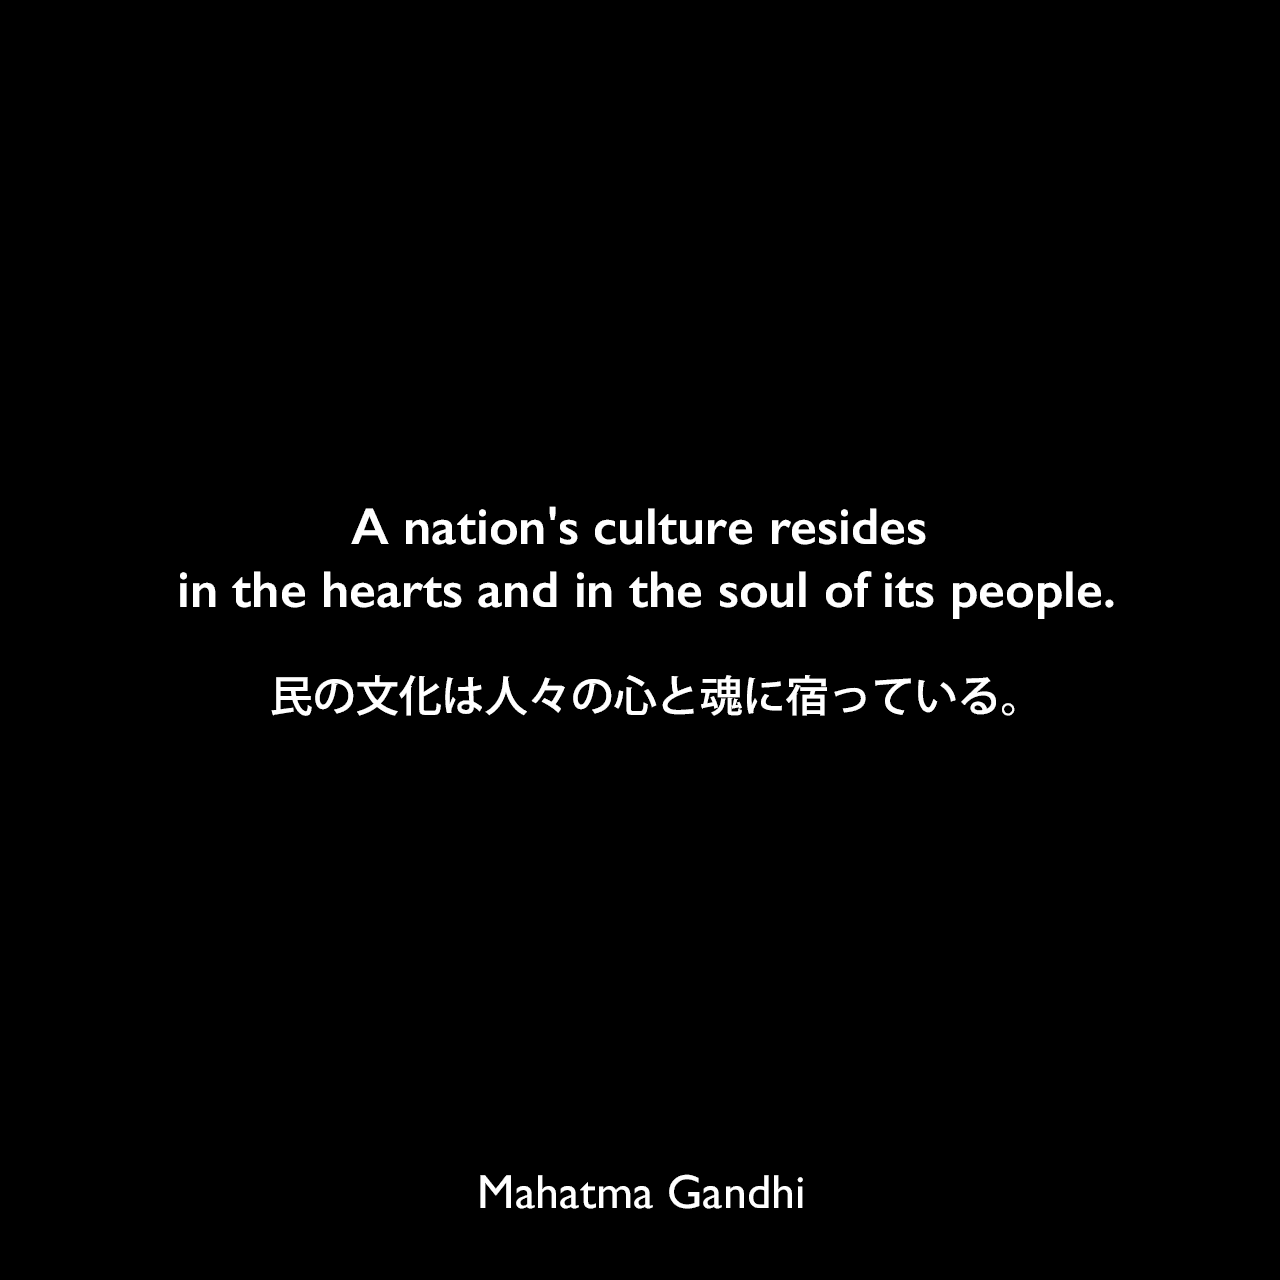 A nation's culture resides in the hearts and in the soul of its people.民の文化は人々の心と魂に宿っている。Mahatma Gandhi